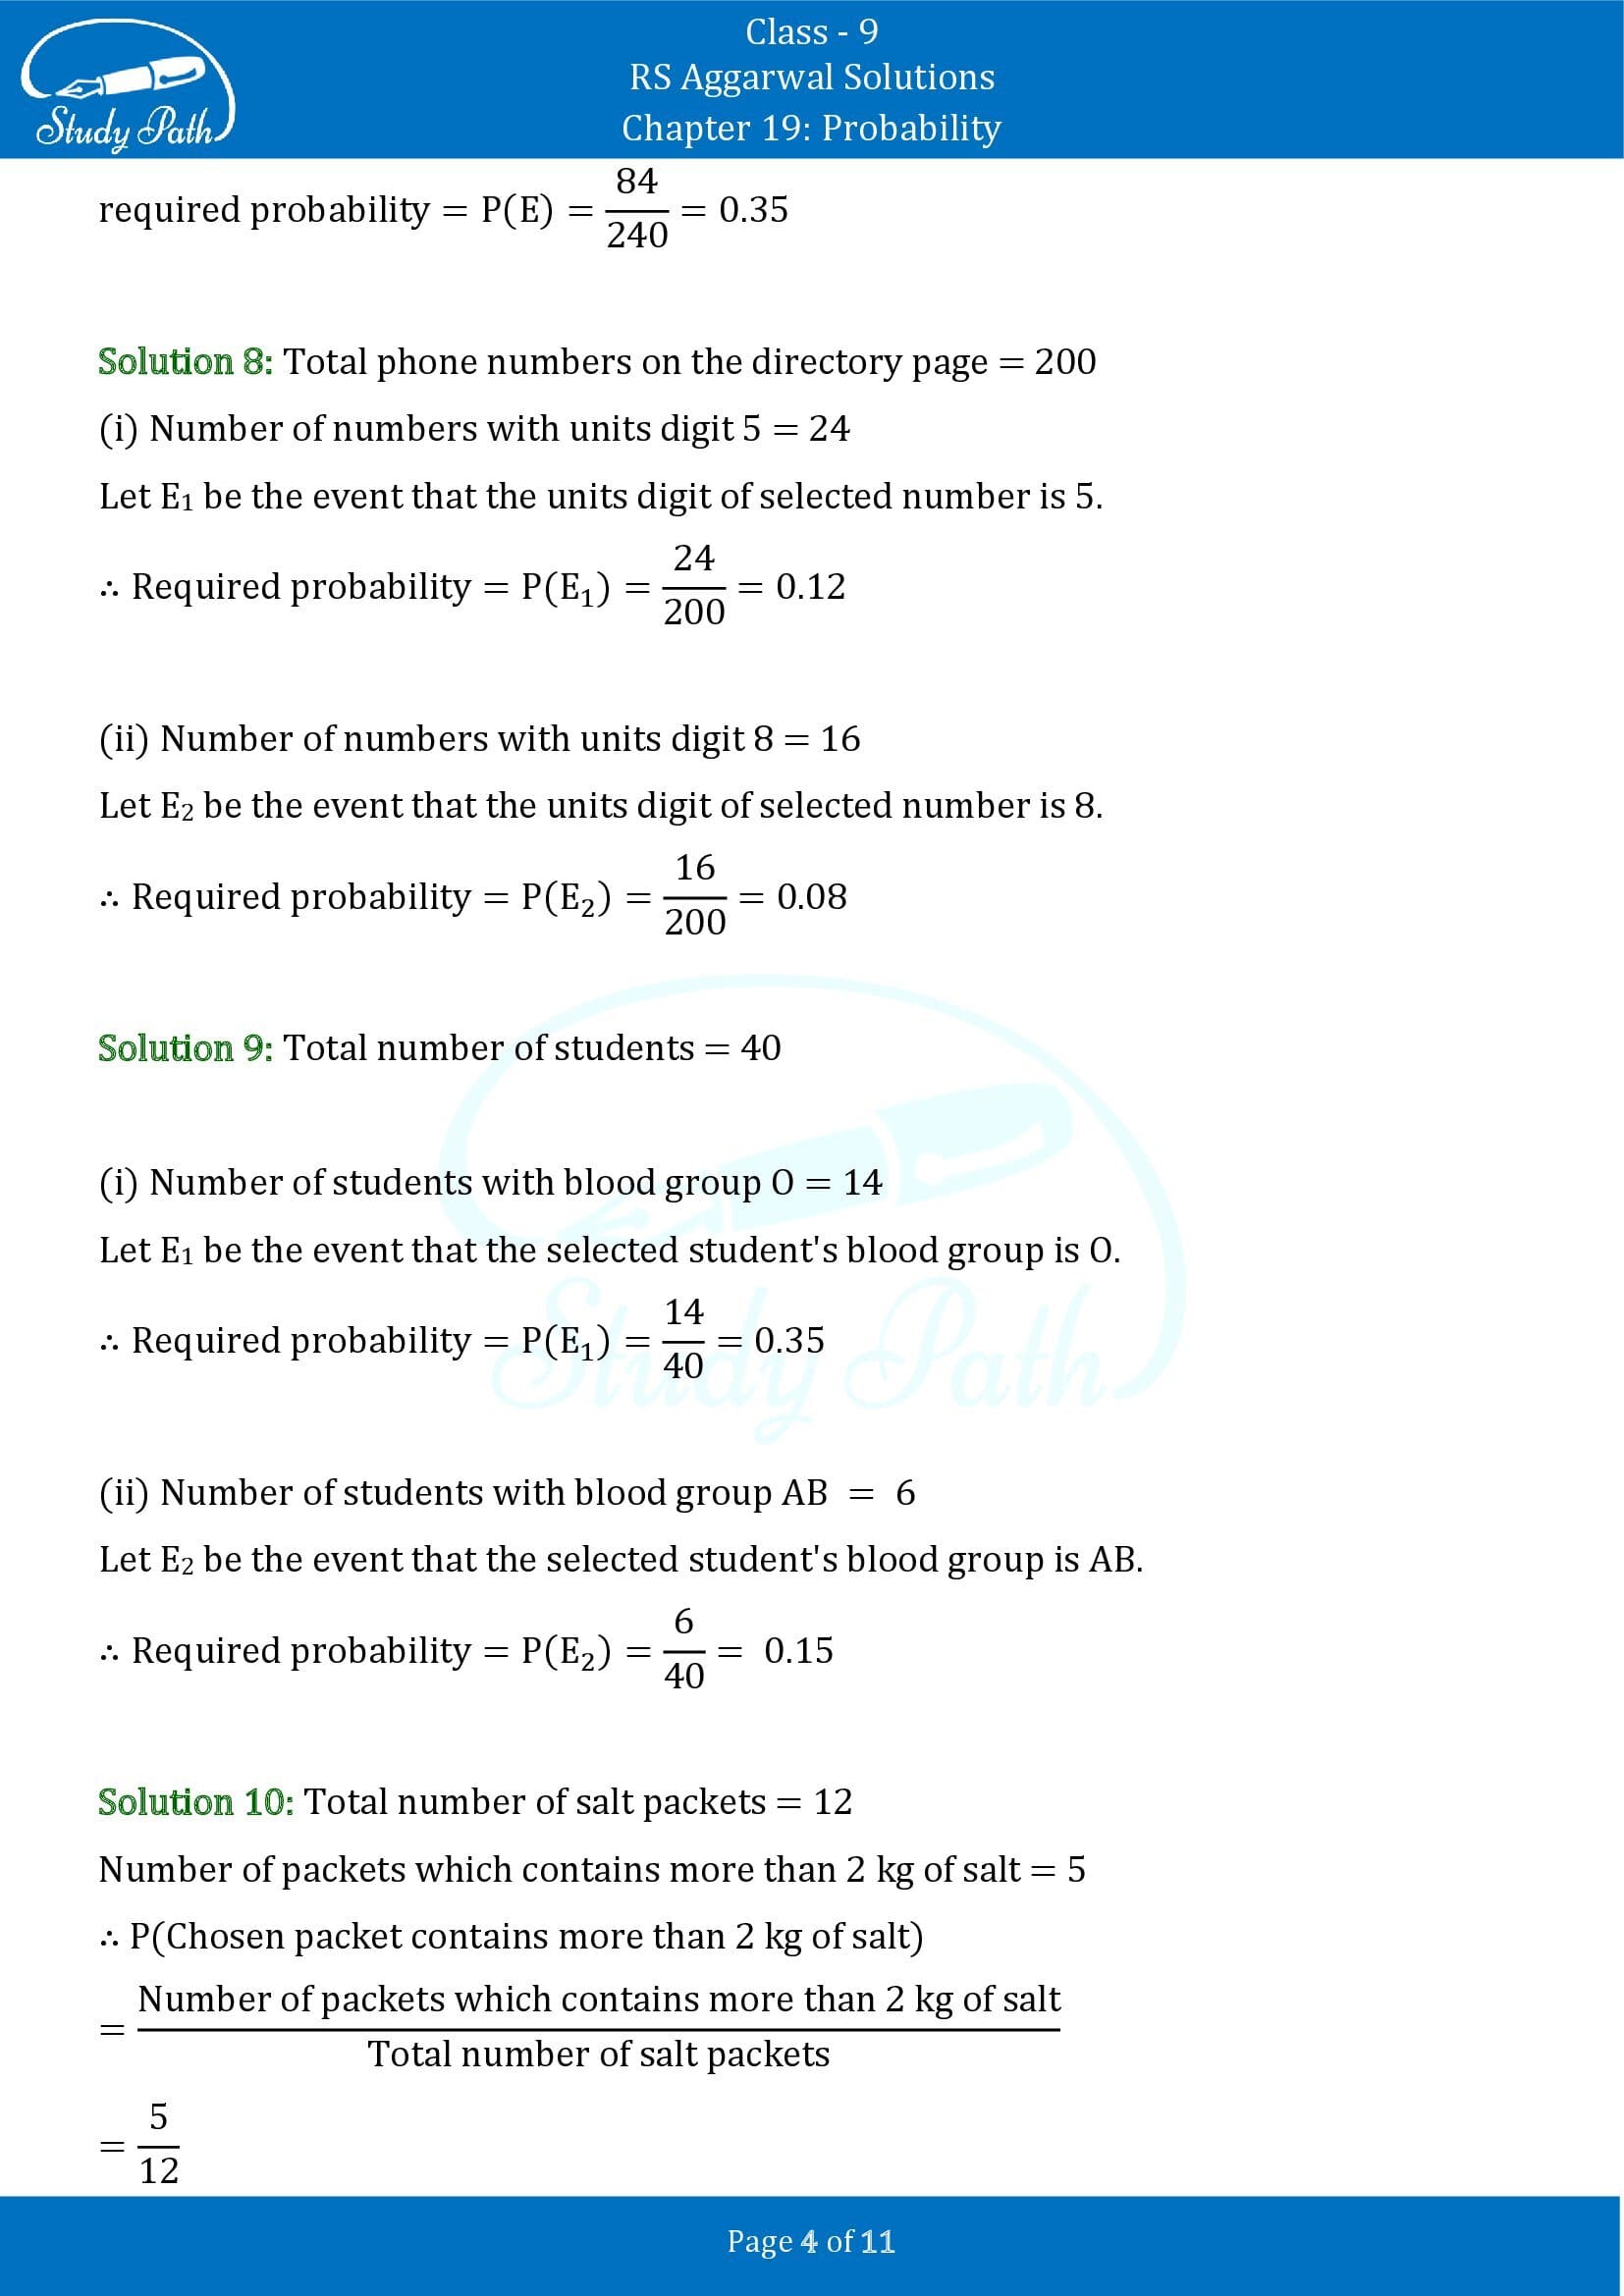 RS Aggarwal Solutions Class 9 Chapter 19 Probability Exercise 19 00004